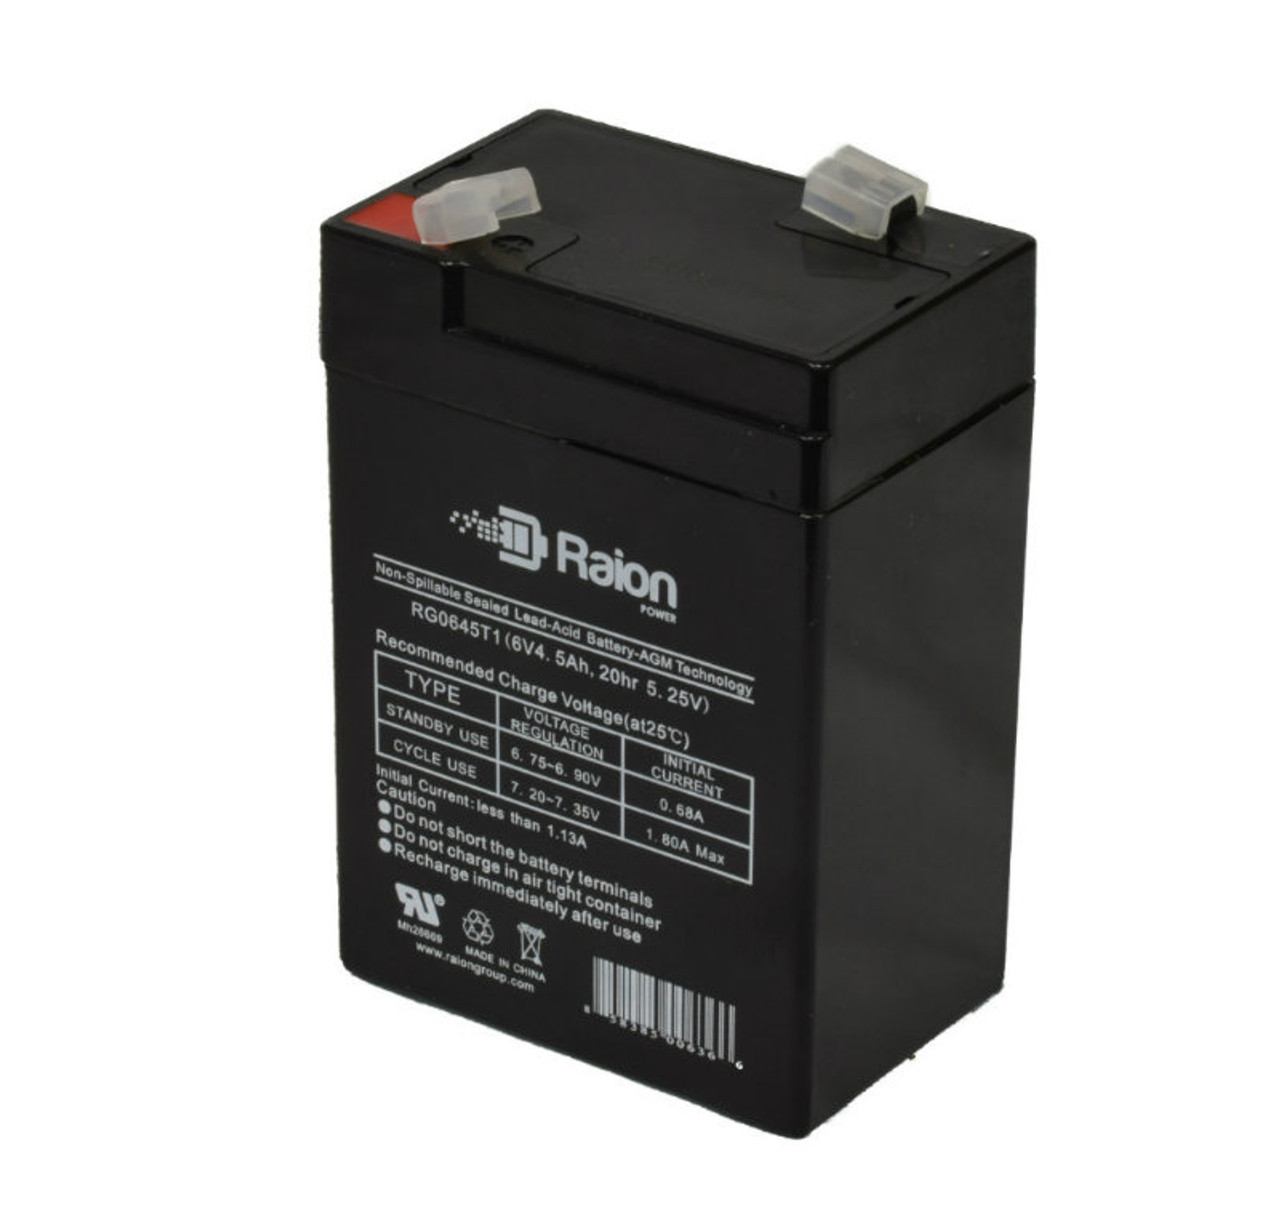 Raion Power RG0645T1 6V 4.5Ah Replacement Battery Cartridge for SeaWill SW640B